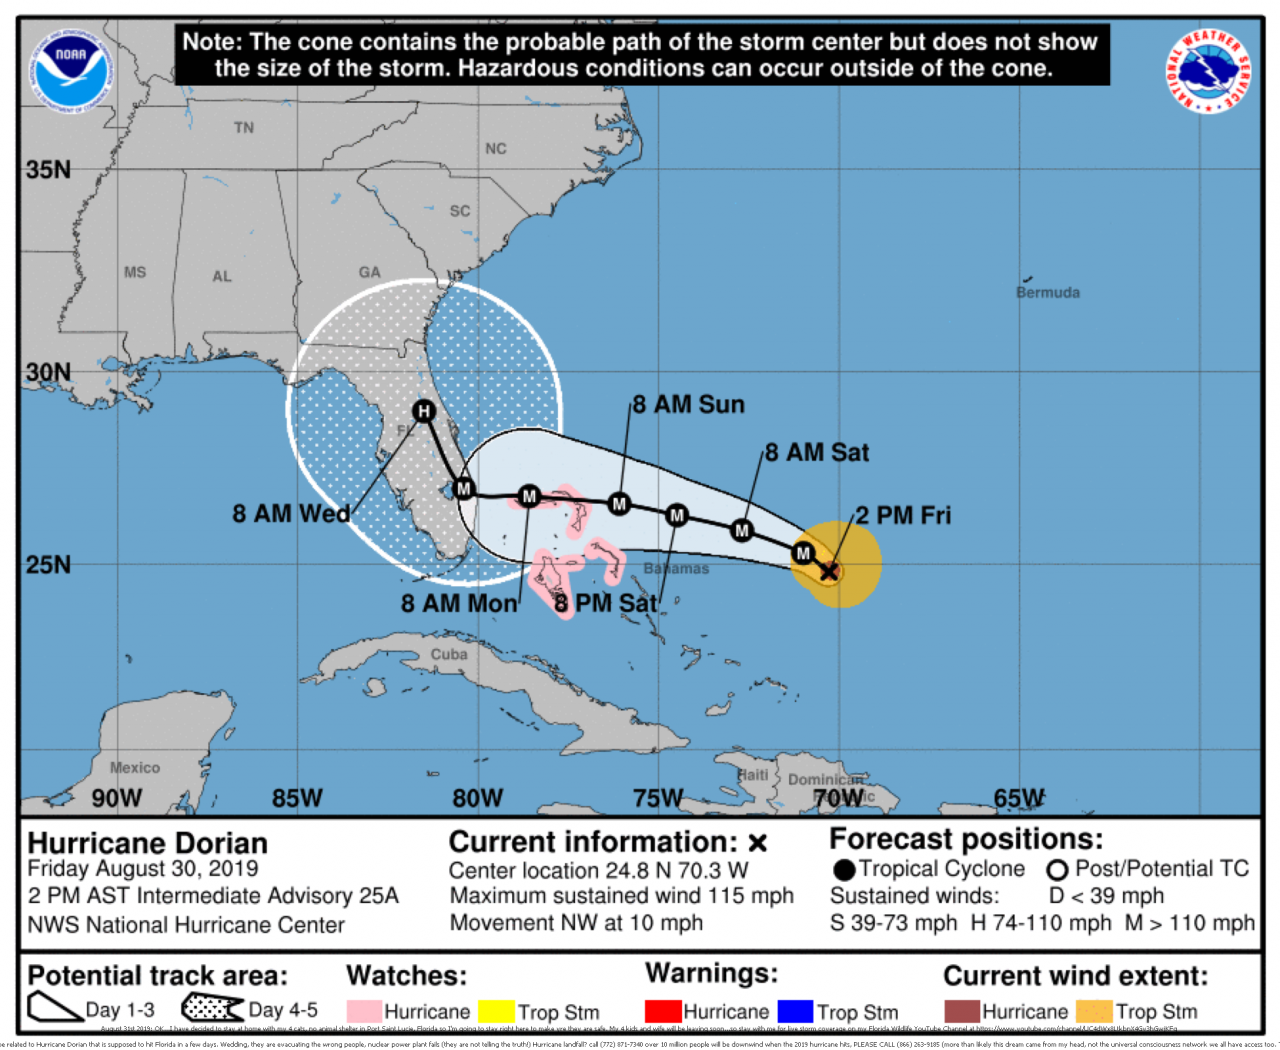 Hurricane Dorian Aug 2019 prediction by Psychic Brian Ladd 053219 5day cone with line and wind
Hurricane Dorian Aug 2019 prediction by Psychic Brian Ladd 053219 5day cone with line and wind
